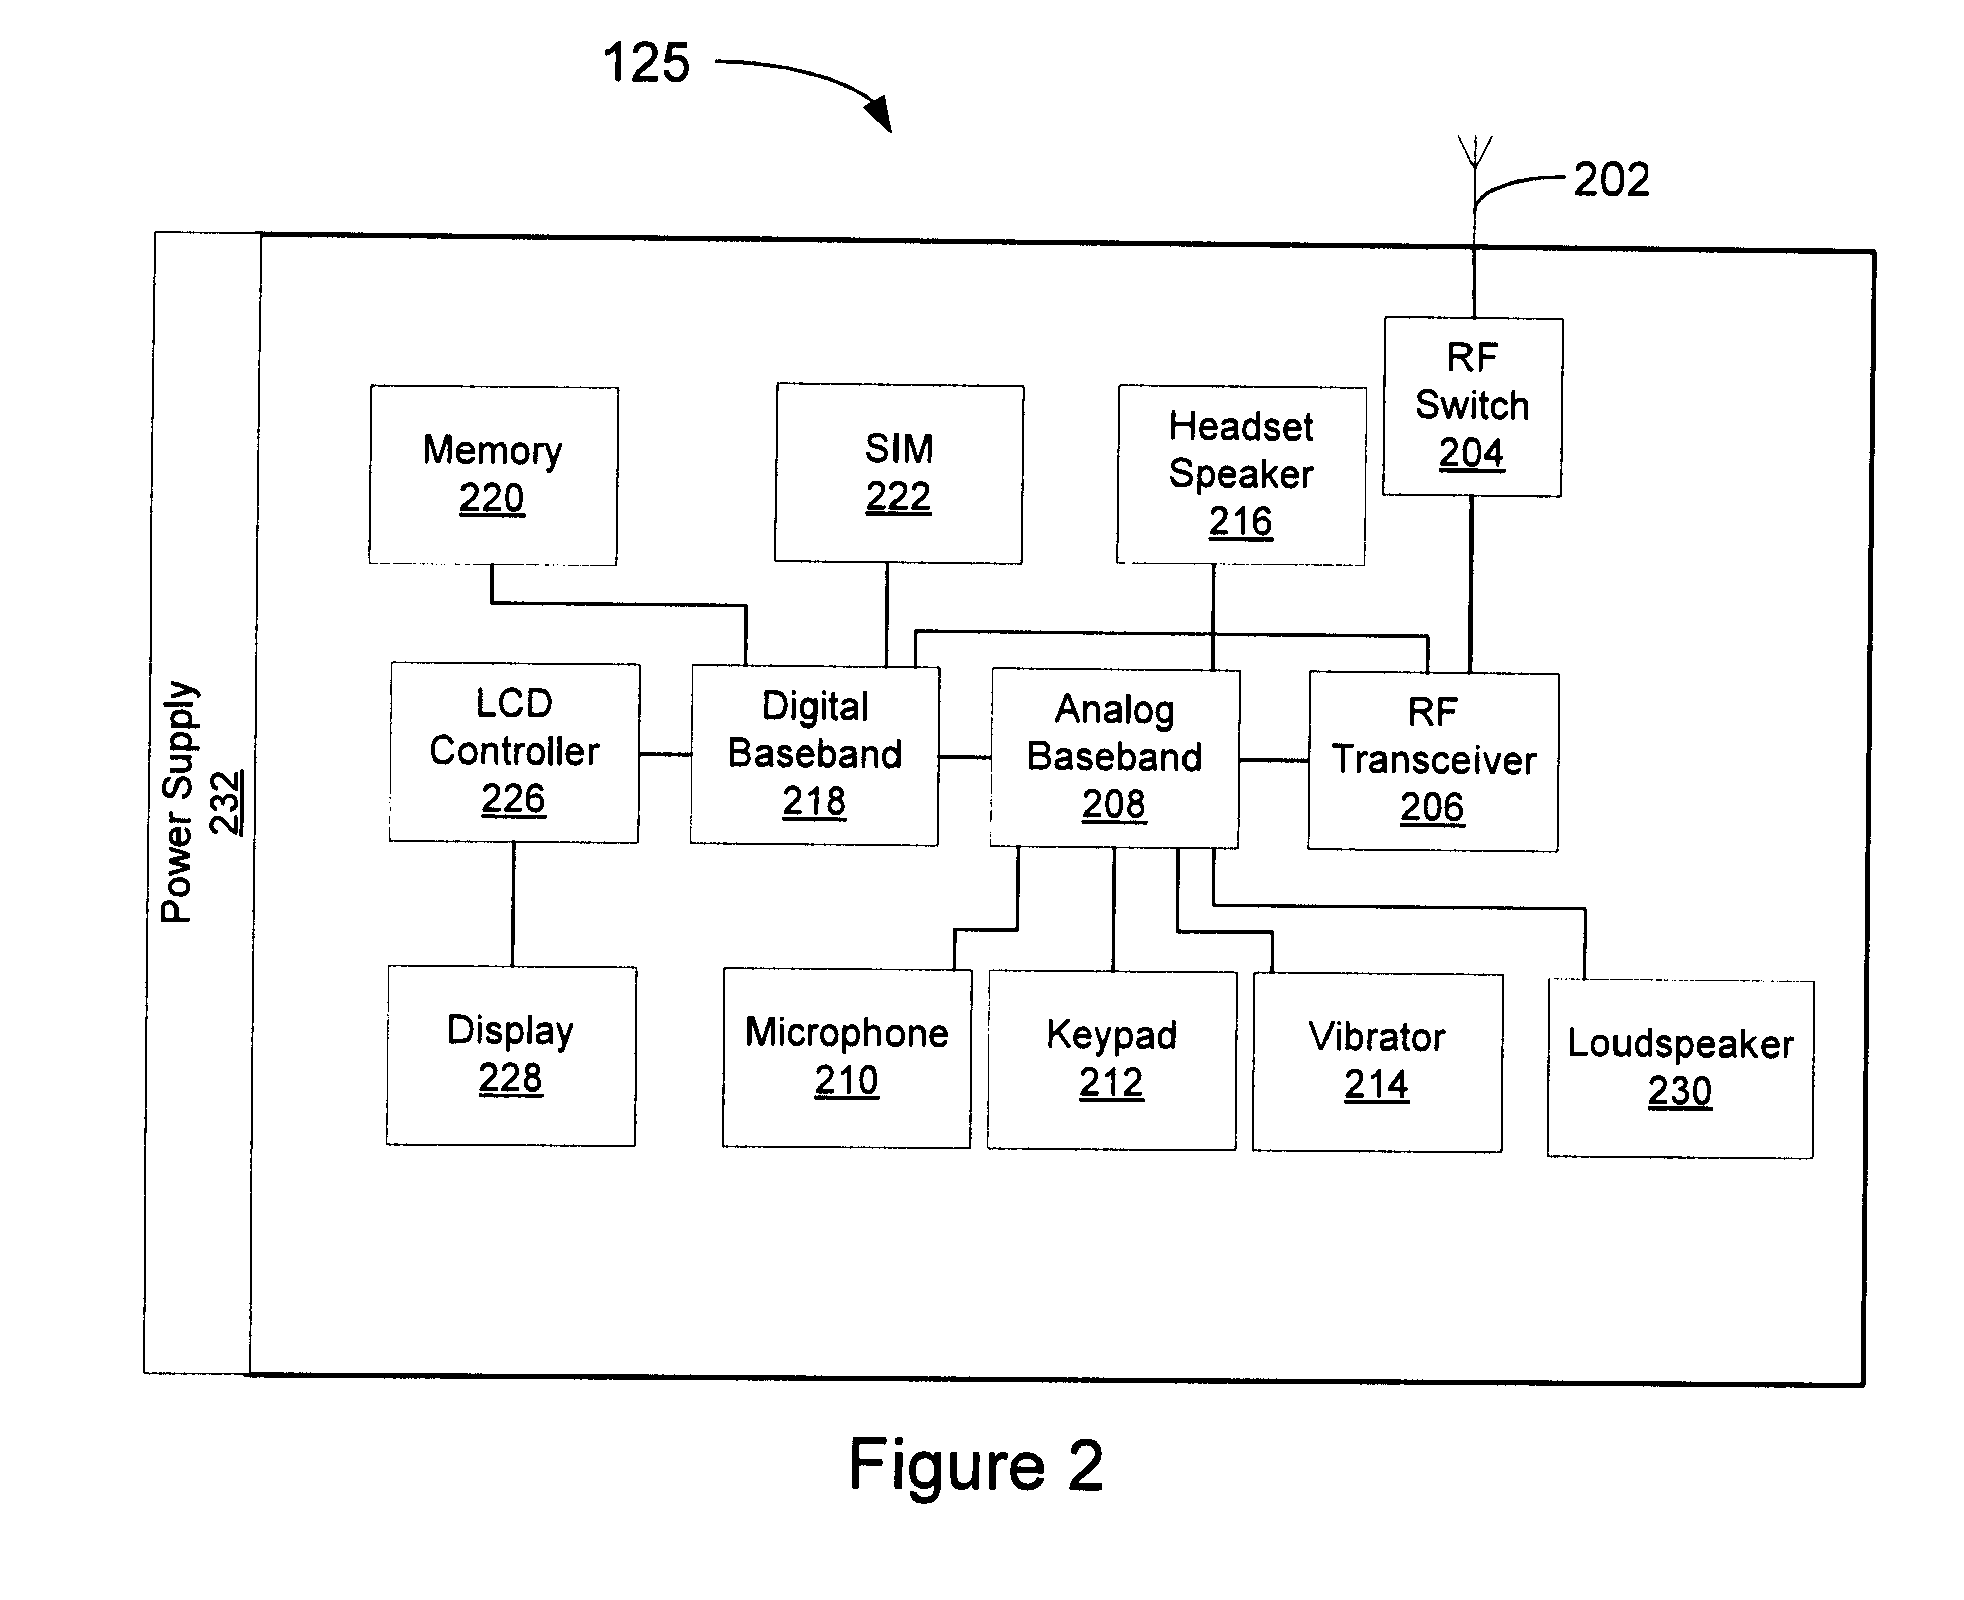 System, Method and Computer-Readable Medium for Provisioning Dual-Homed Voice Call Continuity